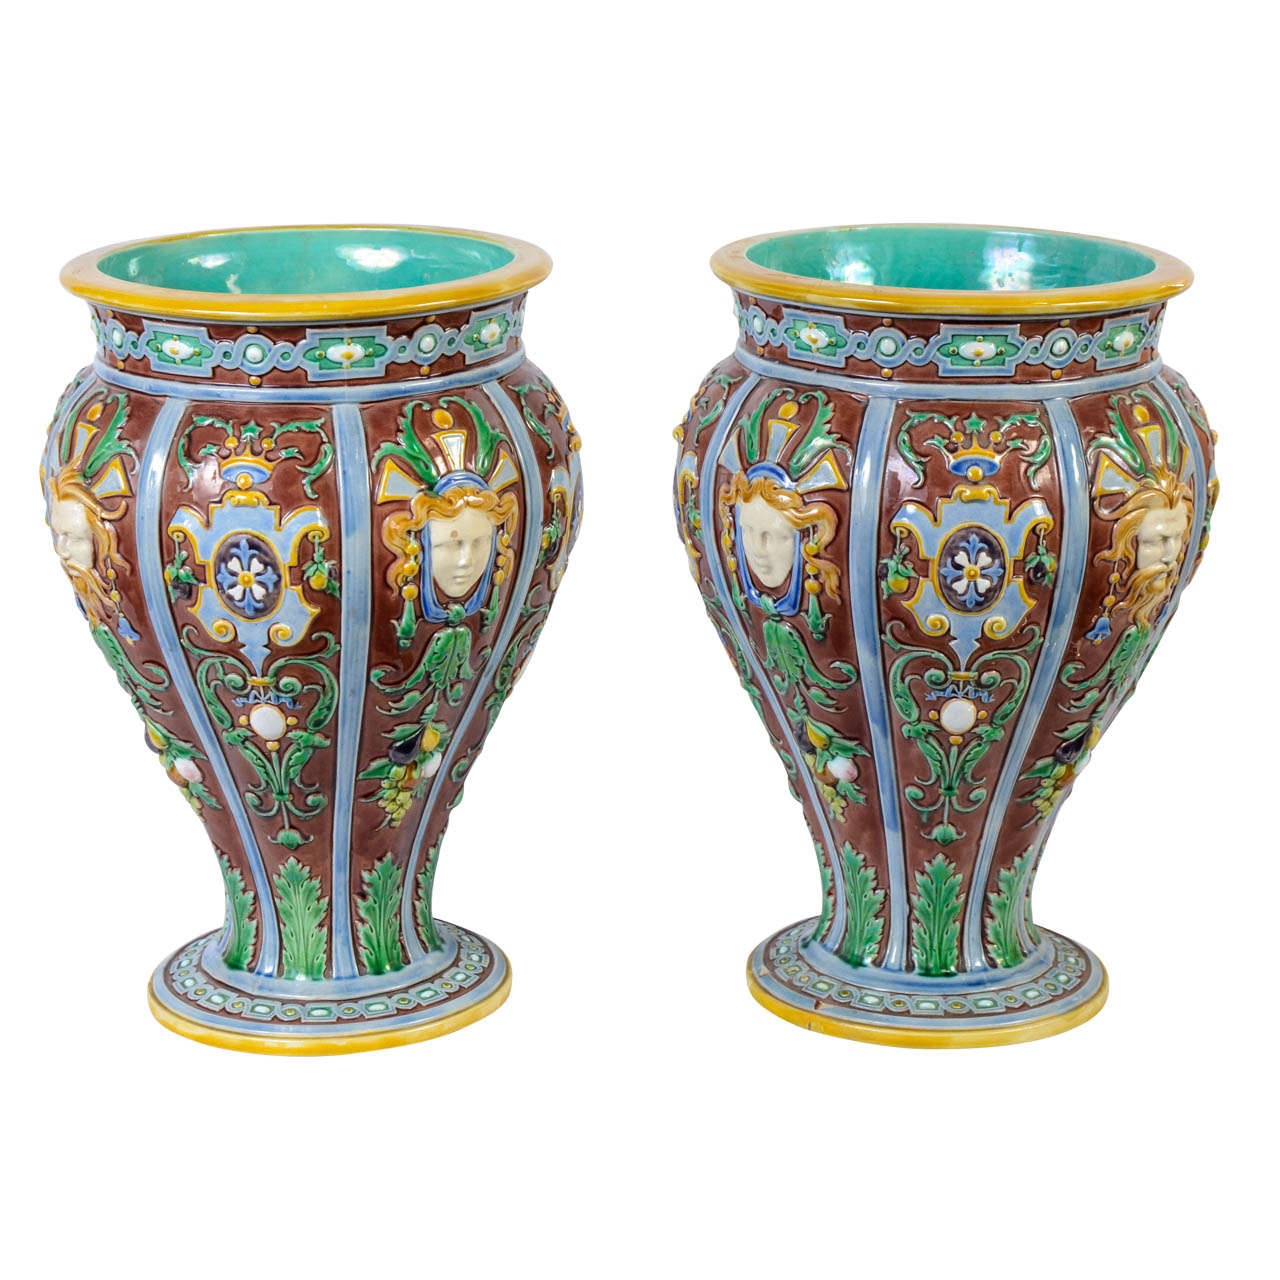 1885 Pair of Rare Vases Signed by Minton For Sale